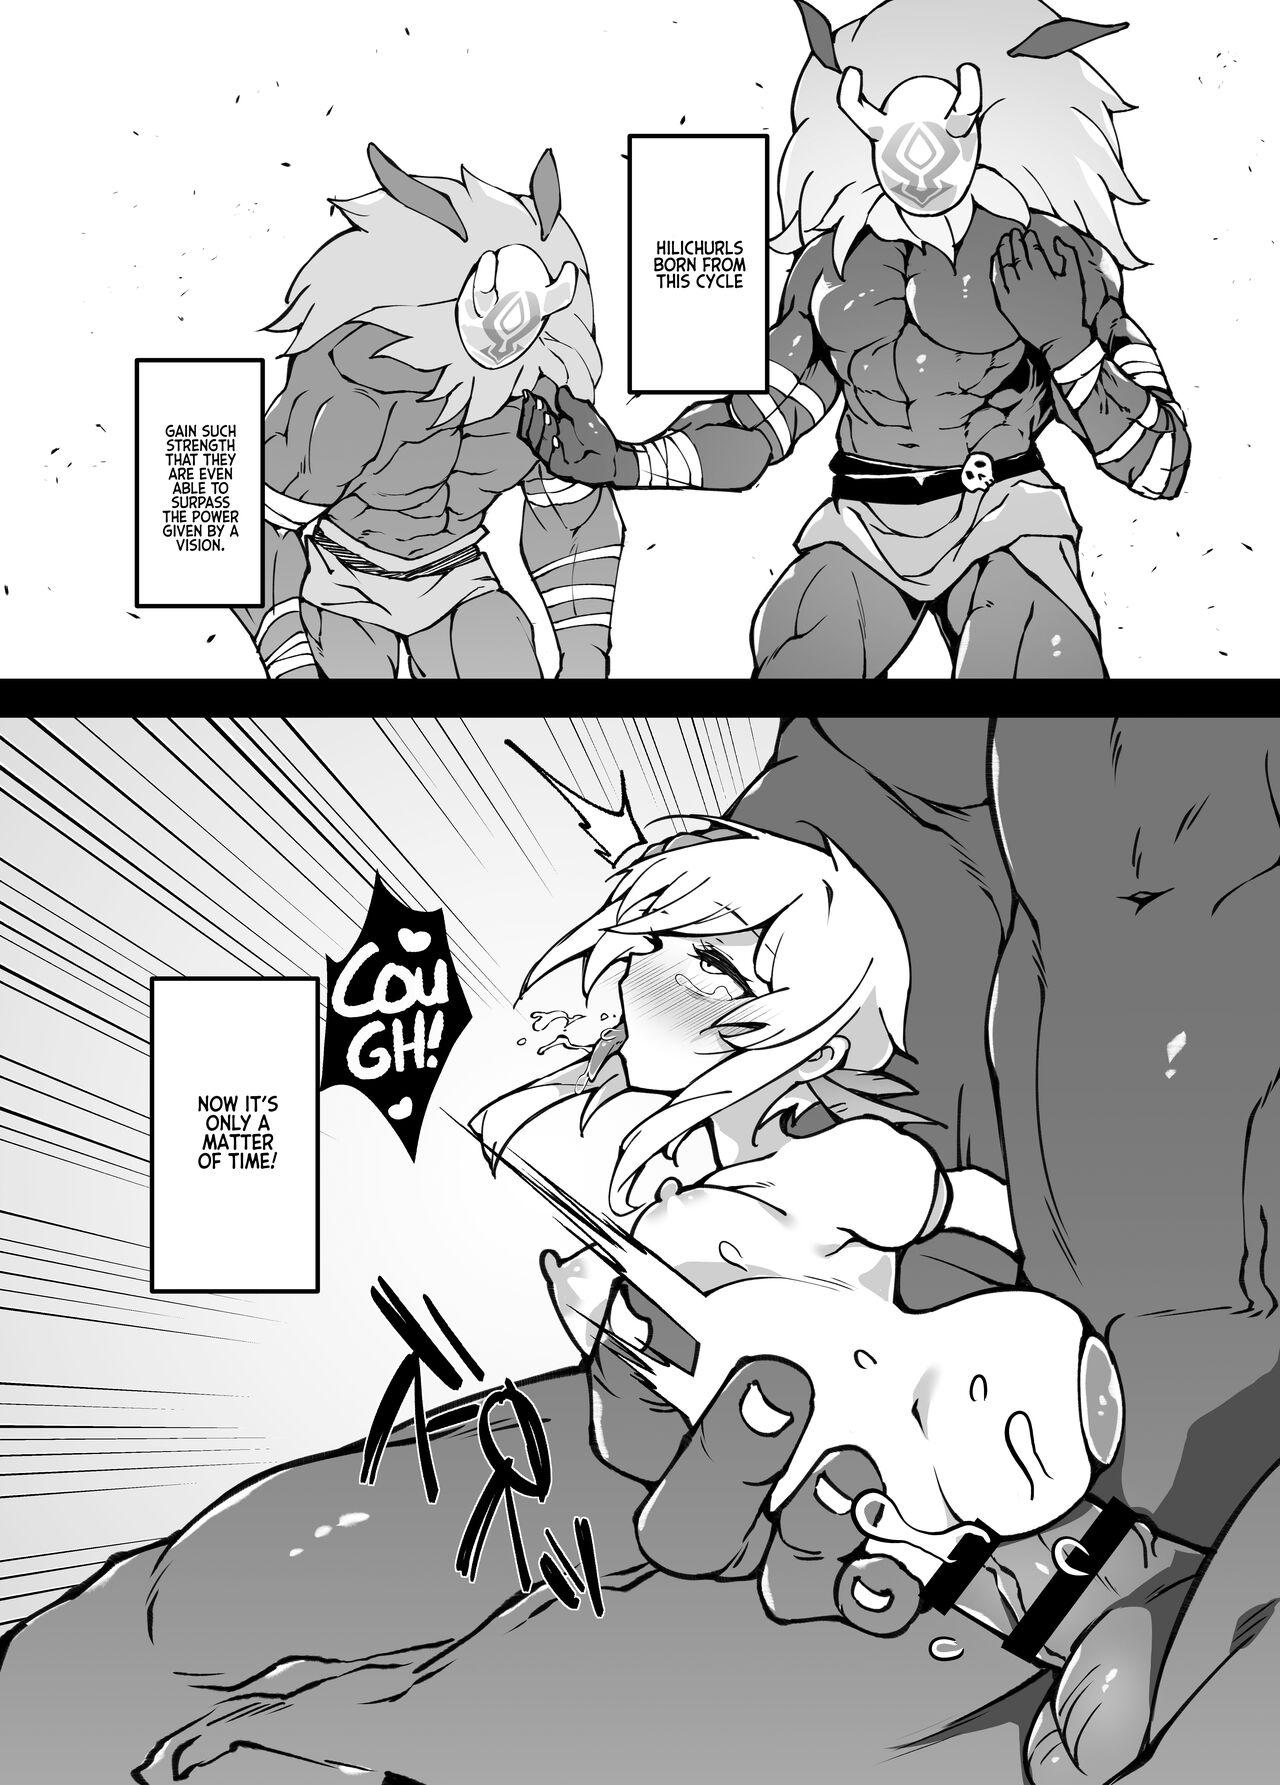 Futa [Karouke (Karou)] The Attack of the Hilichurls II ~The Invasion's Prelude~ Noelle,Chivalric Blossom that withered~ (Genshin Impact) [English] [Kyuume] [Digital] - Genshin impact Perfect Tits - Page 7